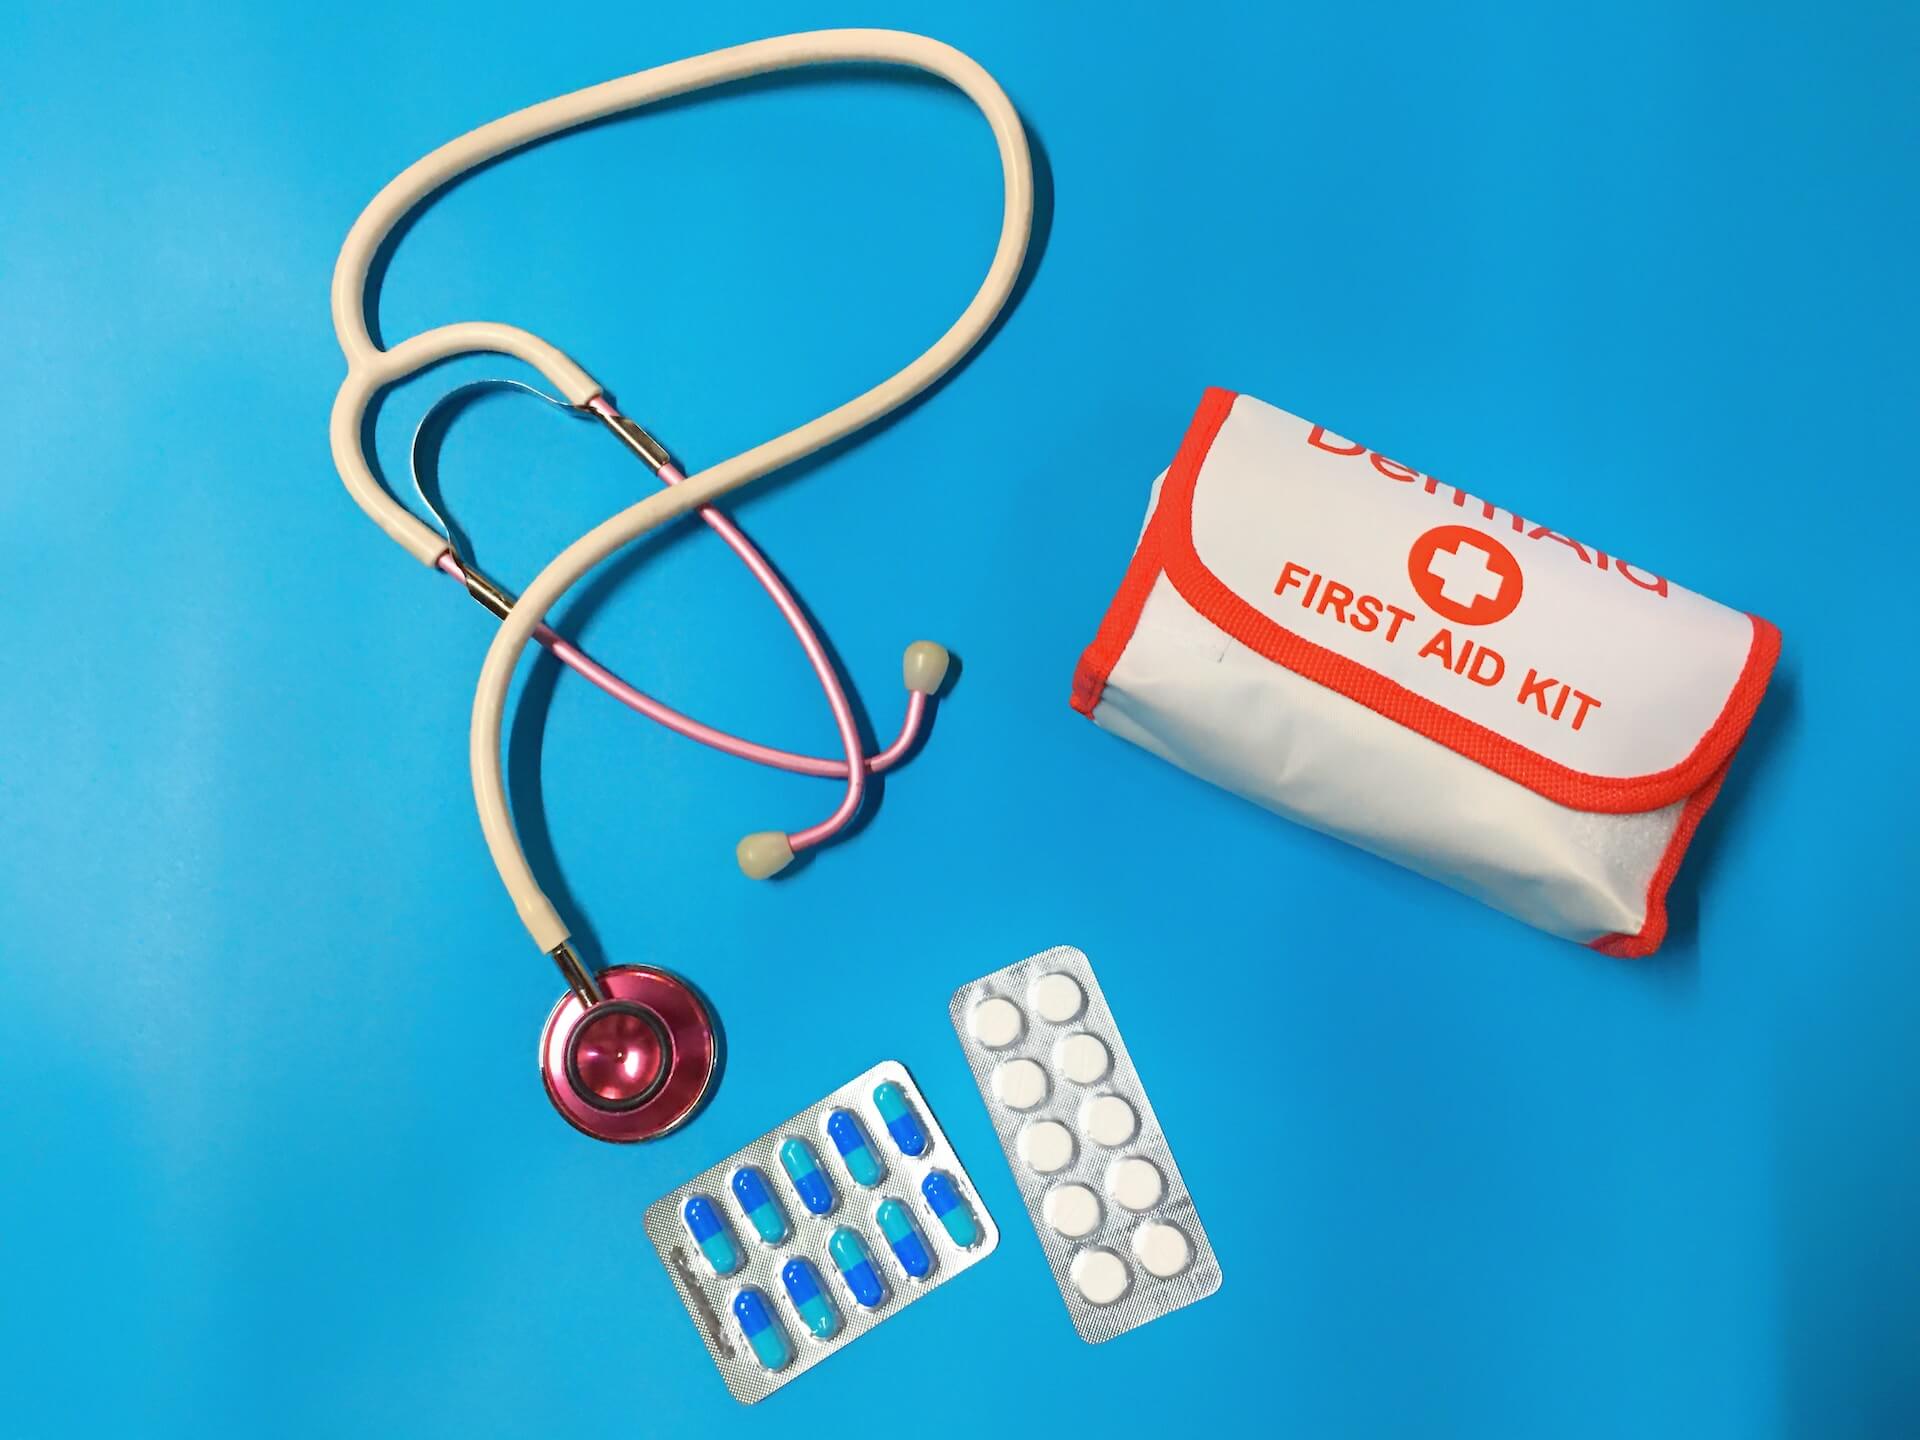 Preparing A First Aid Kit That Can Save Lives: A List of Must-Haves